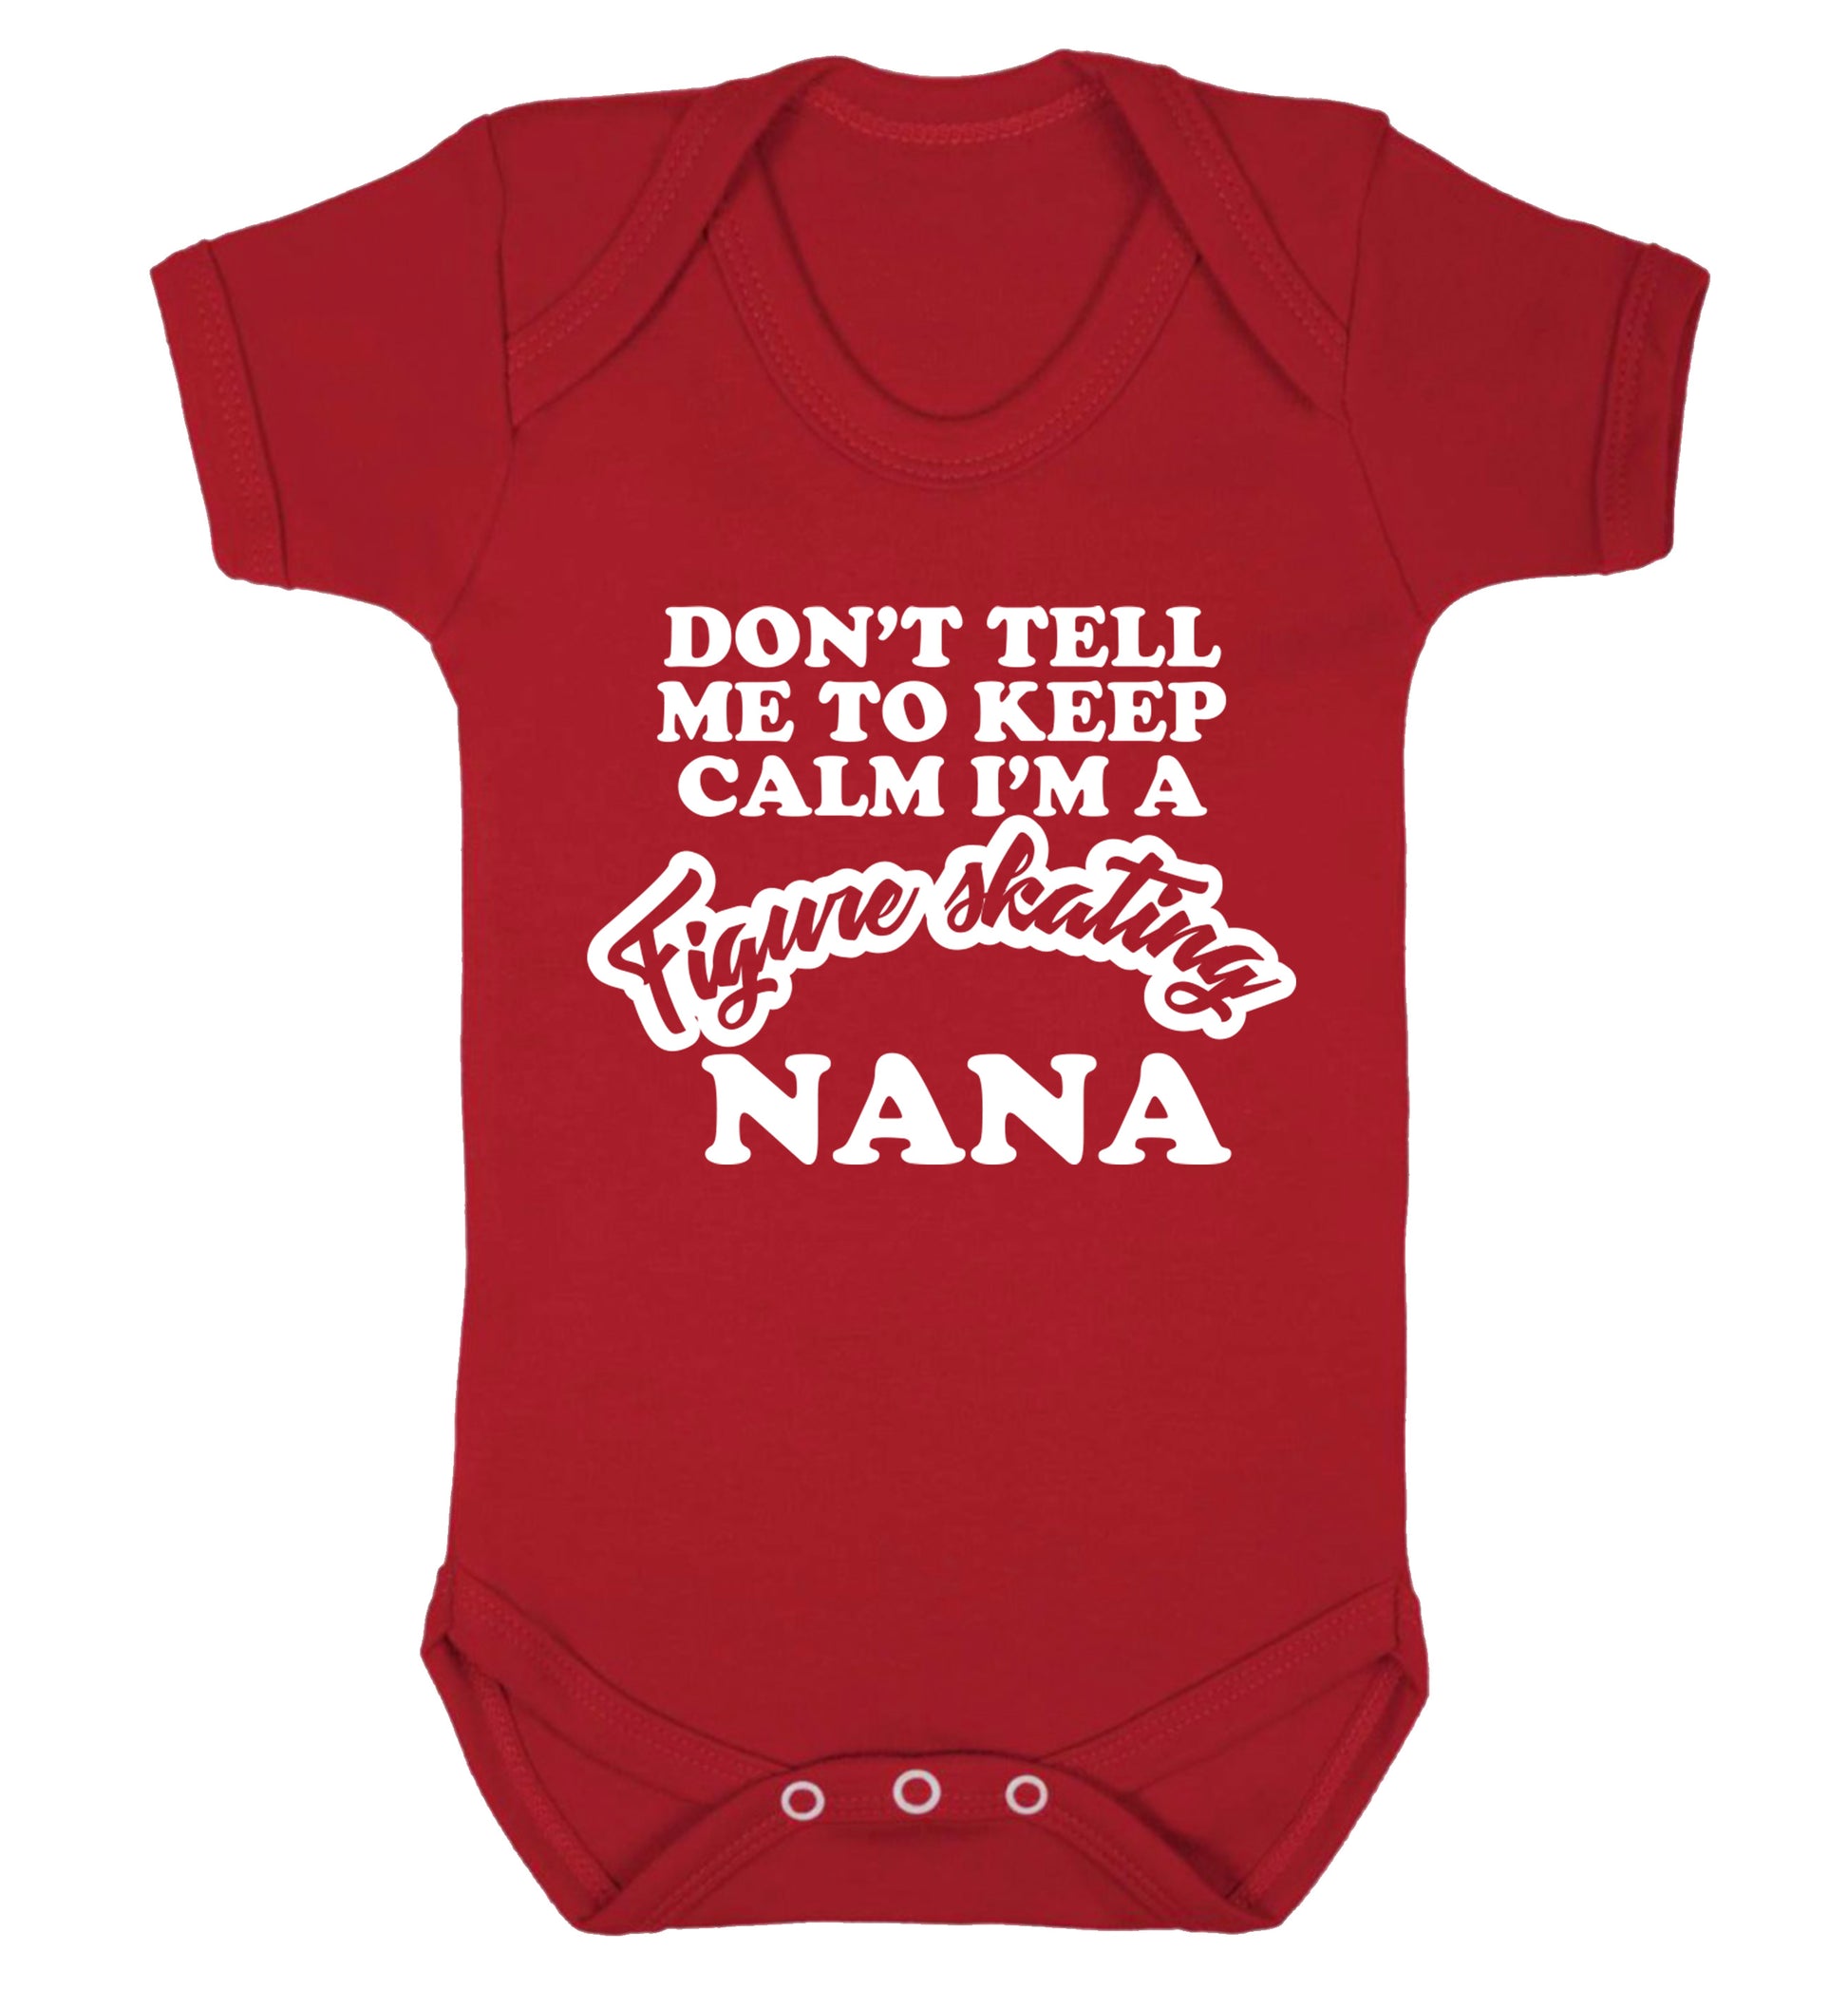 Don't tell me to keep calm I'm a figure skating nana Baby Vest red 18-24 months